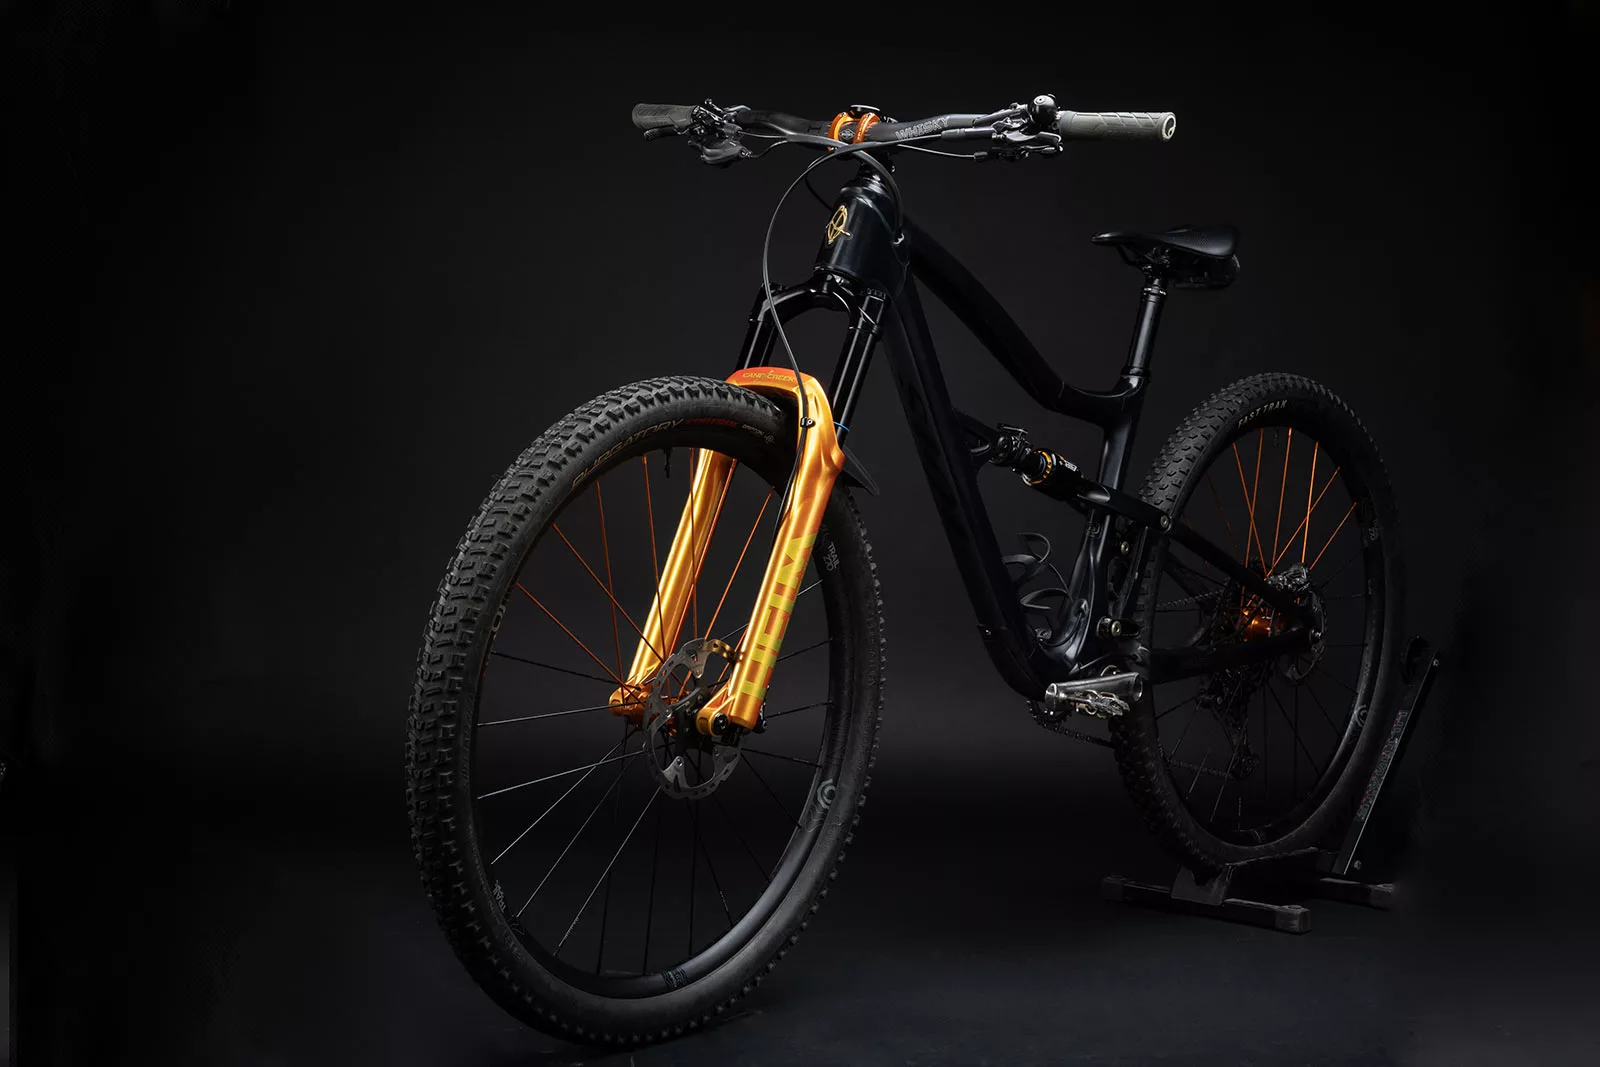 cane creek helm fork in special sunburst colorway shown on an Ibis mountain bike